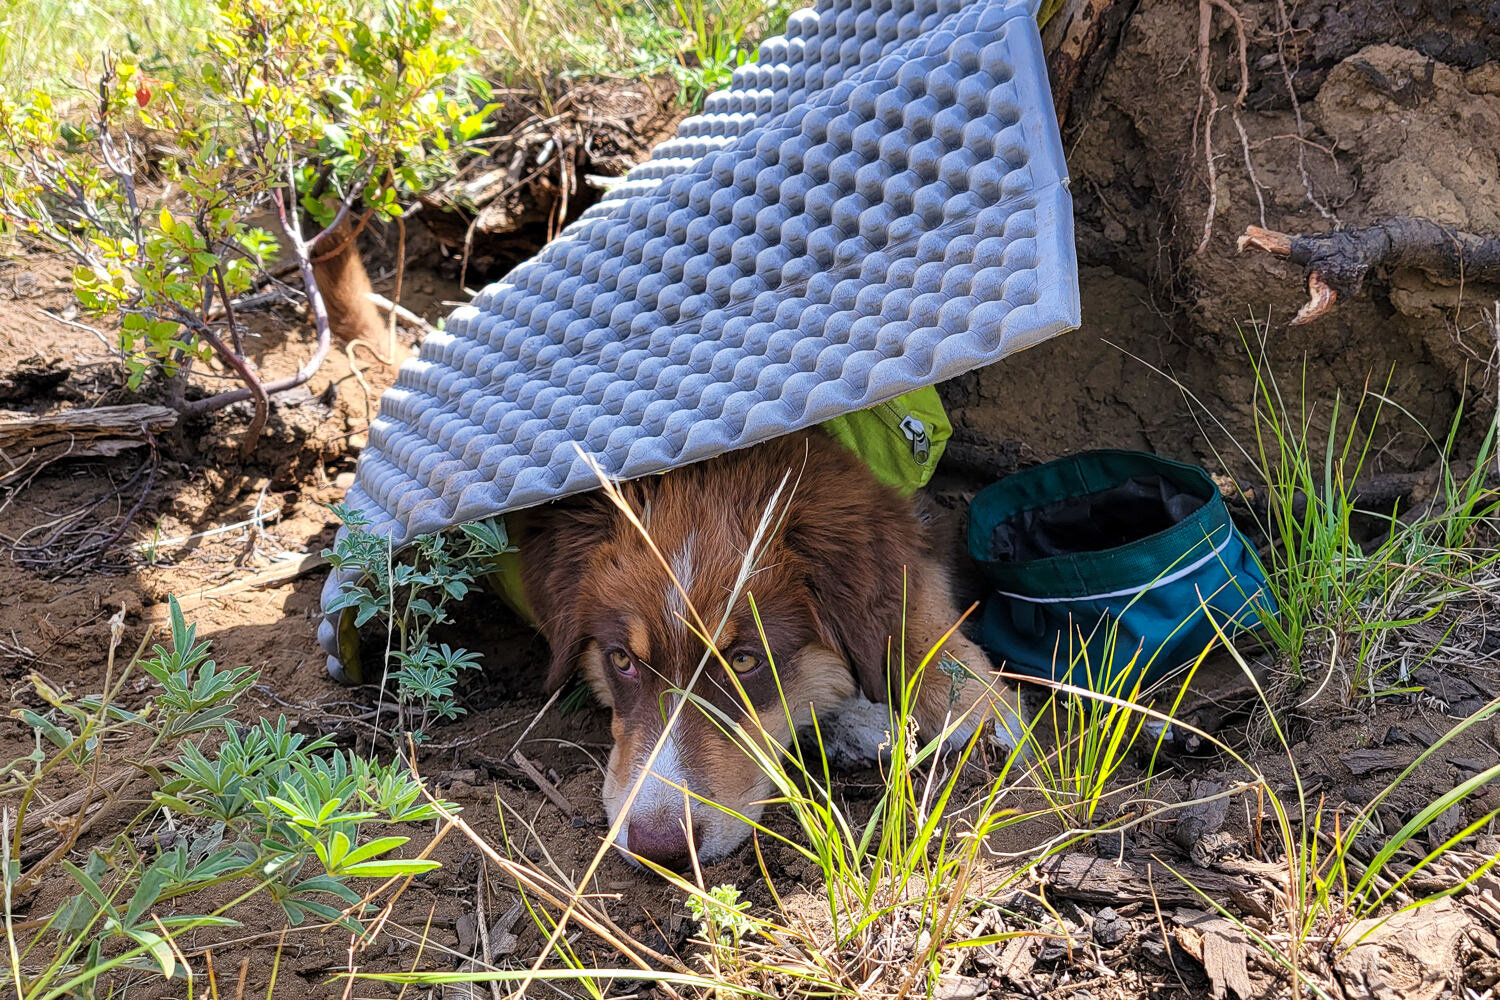 Give your dog plenty of breaks in the shade during hot days on the trail